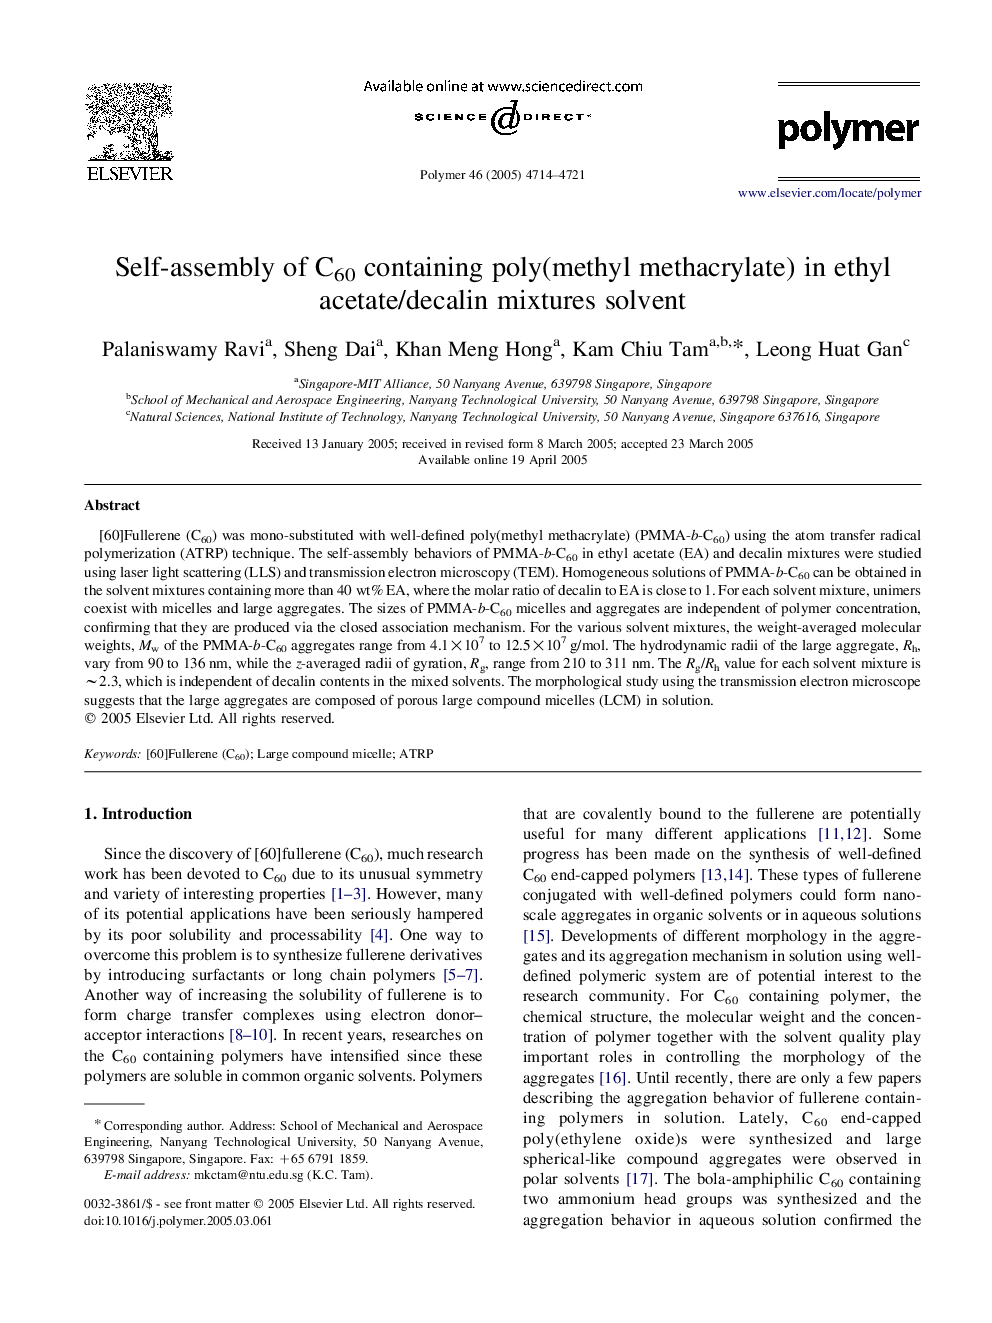 Self-assembly of C60 containing poly(methyl methacrylate) in ethyl acetate/decalin mixtures solvent